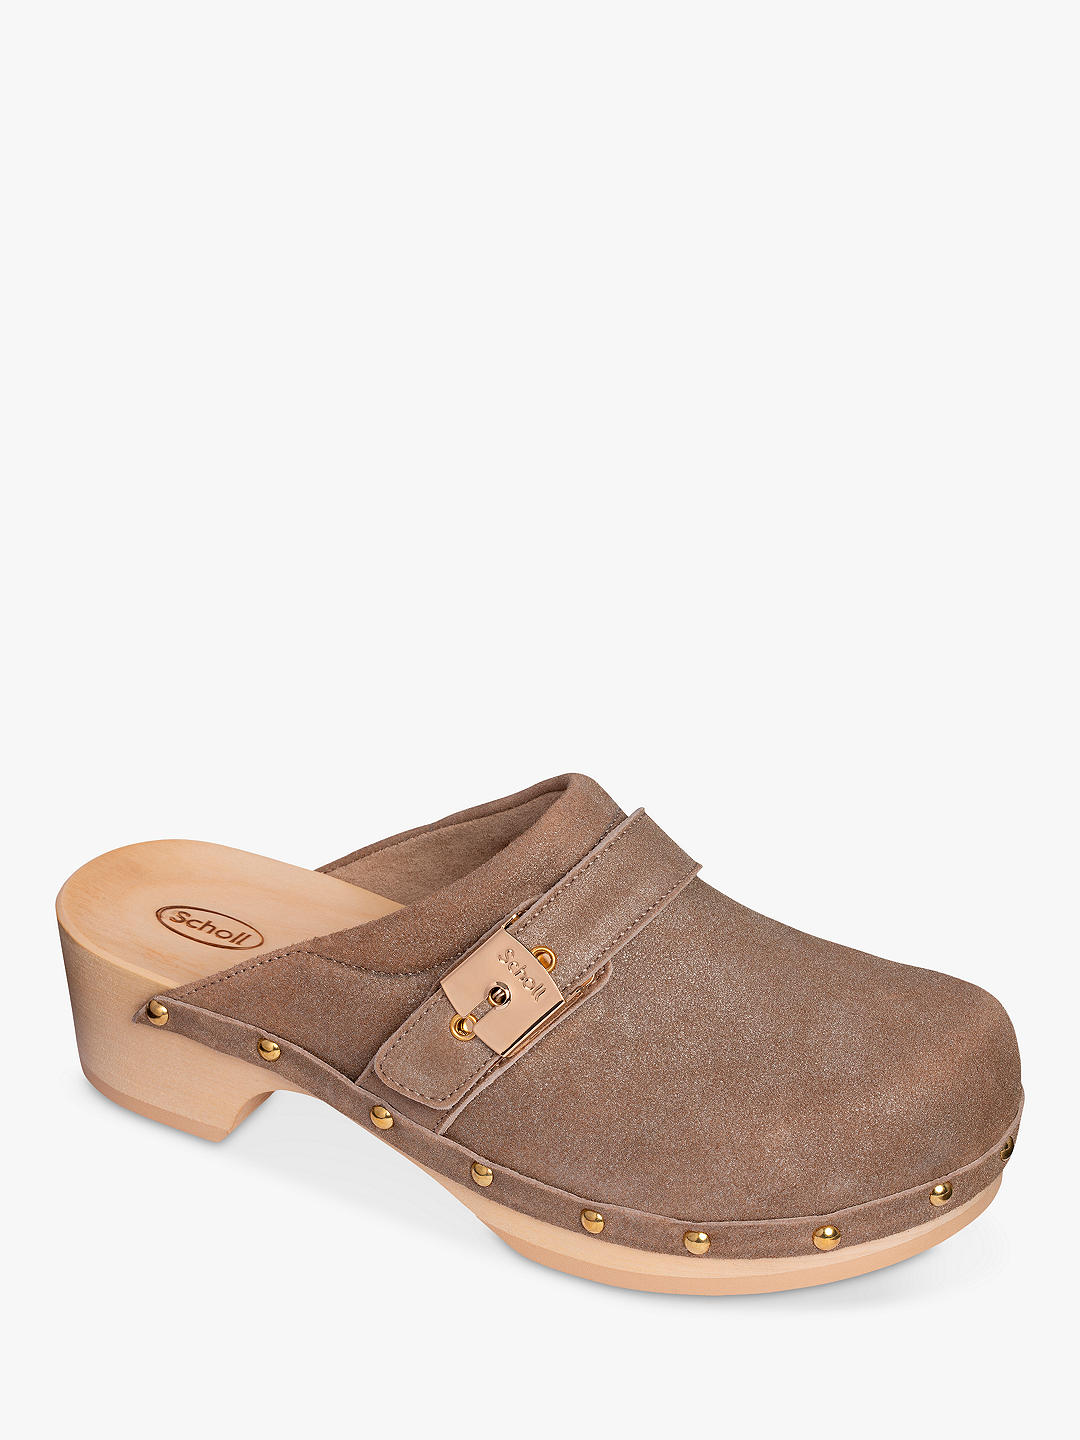 Scholl Pescura Leather & Wood Clog, Taupe